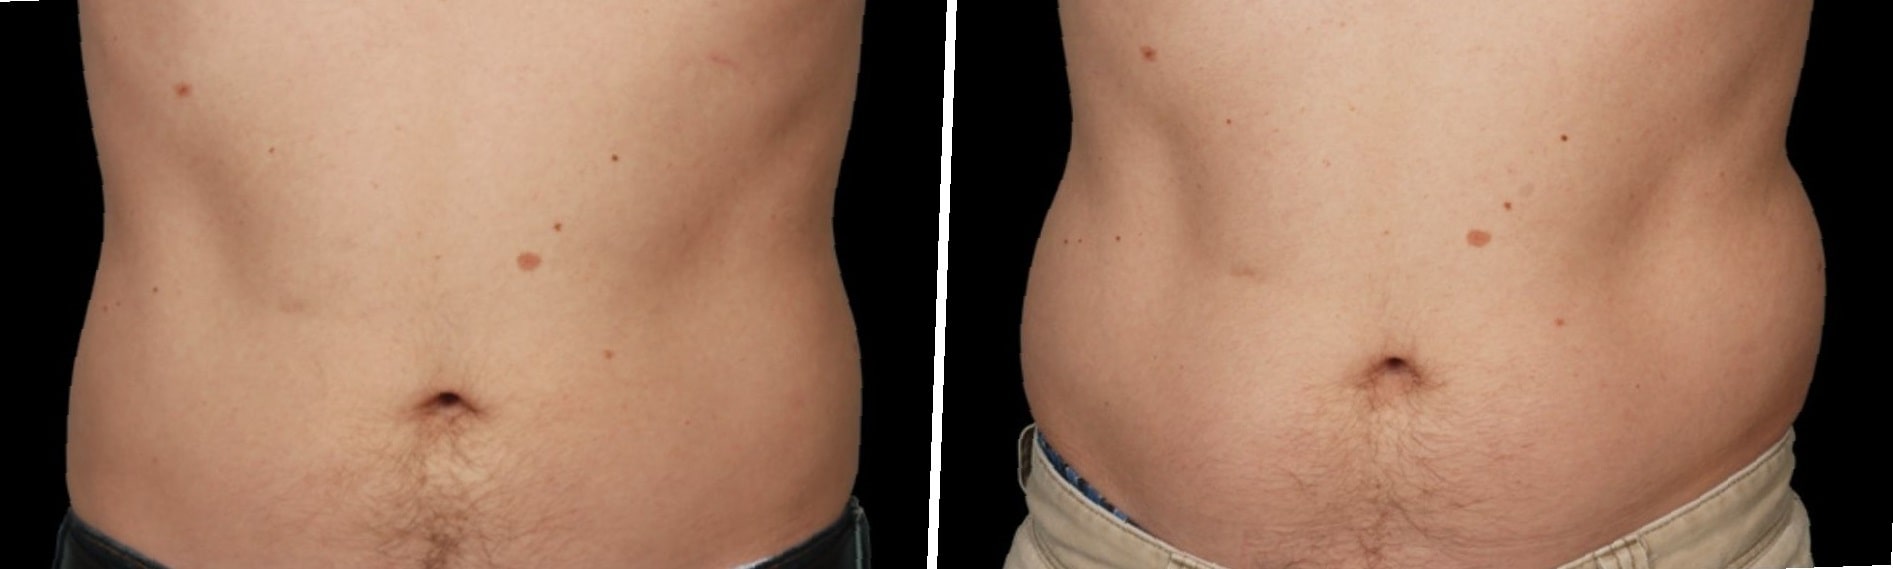 coolsculpting-before-and-after-stomach-5